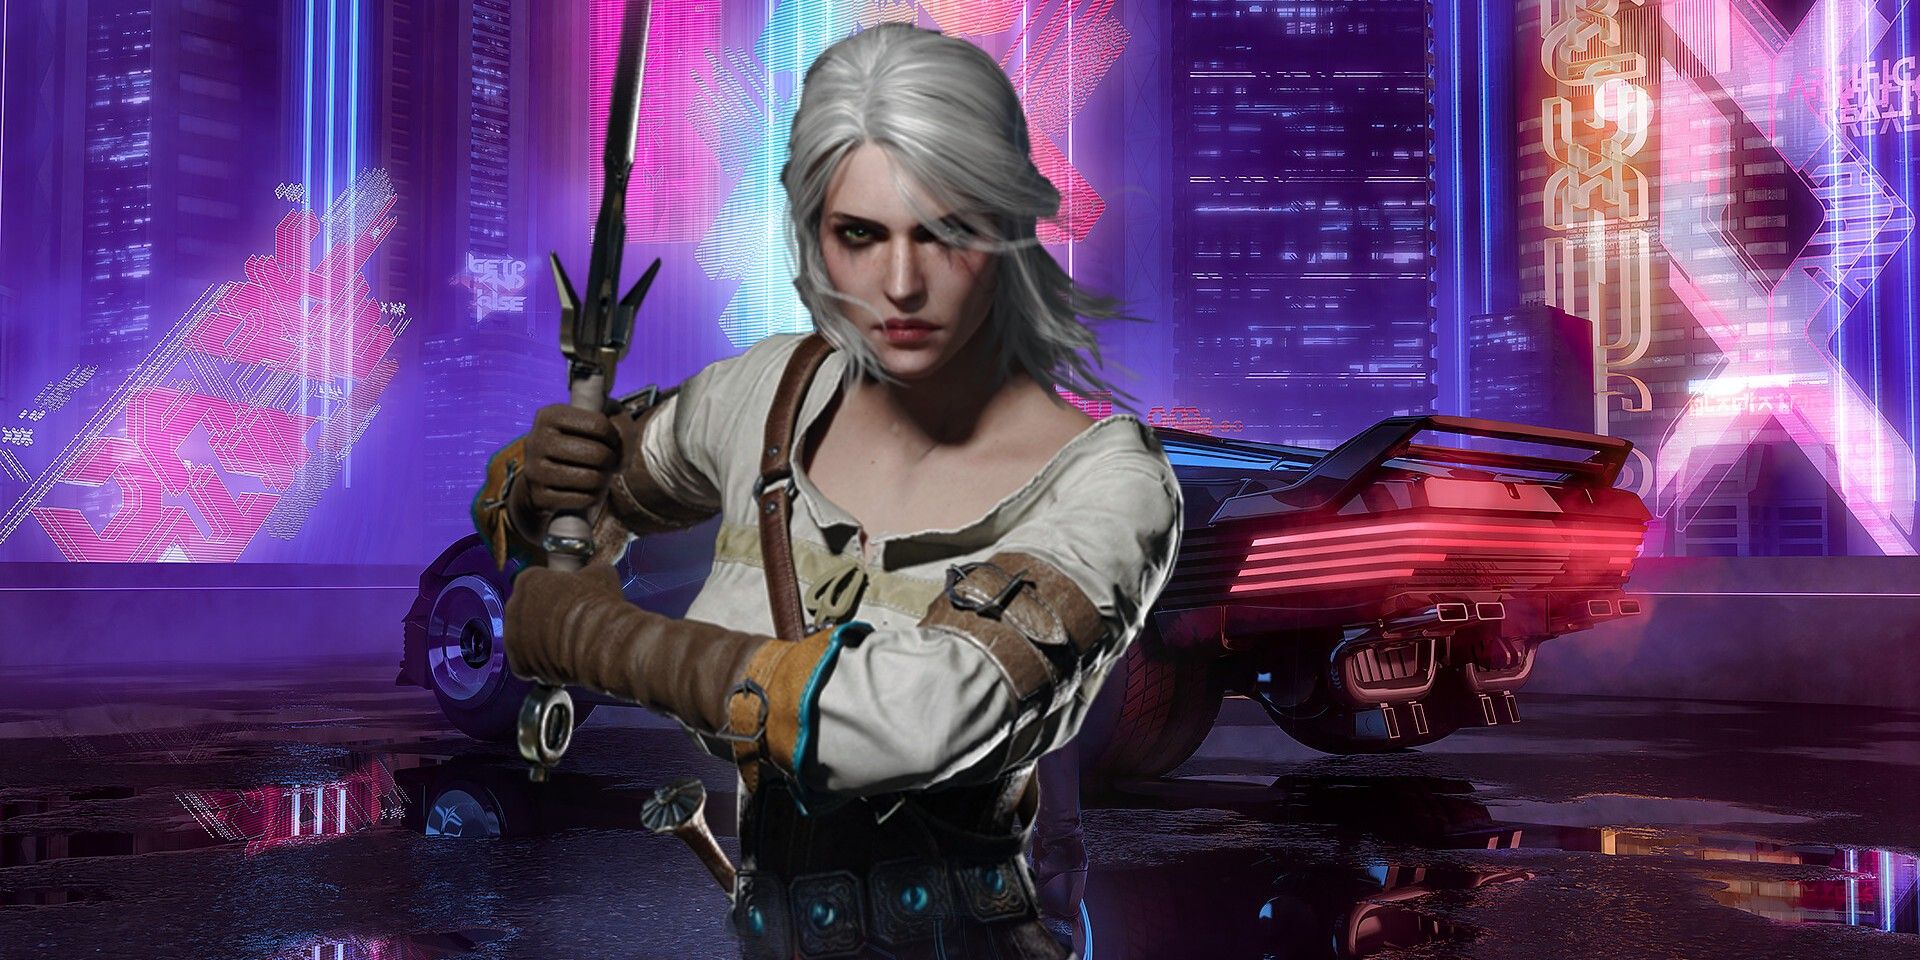 CDPR still plans to release 'Cyberpunk 2077' and 'The Witcher 3